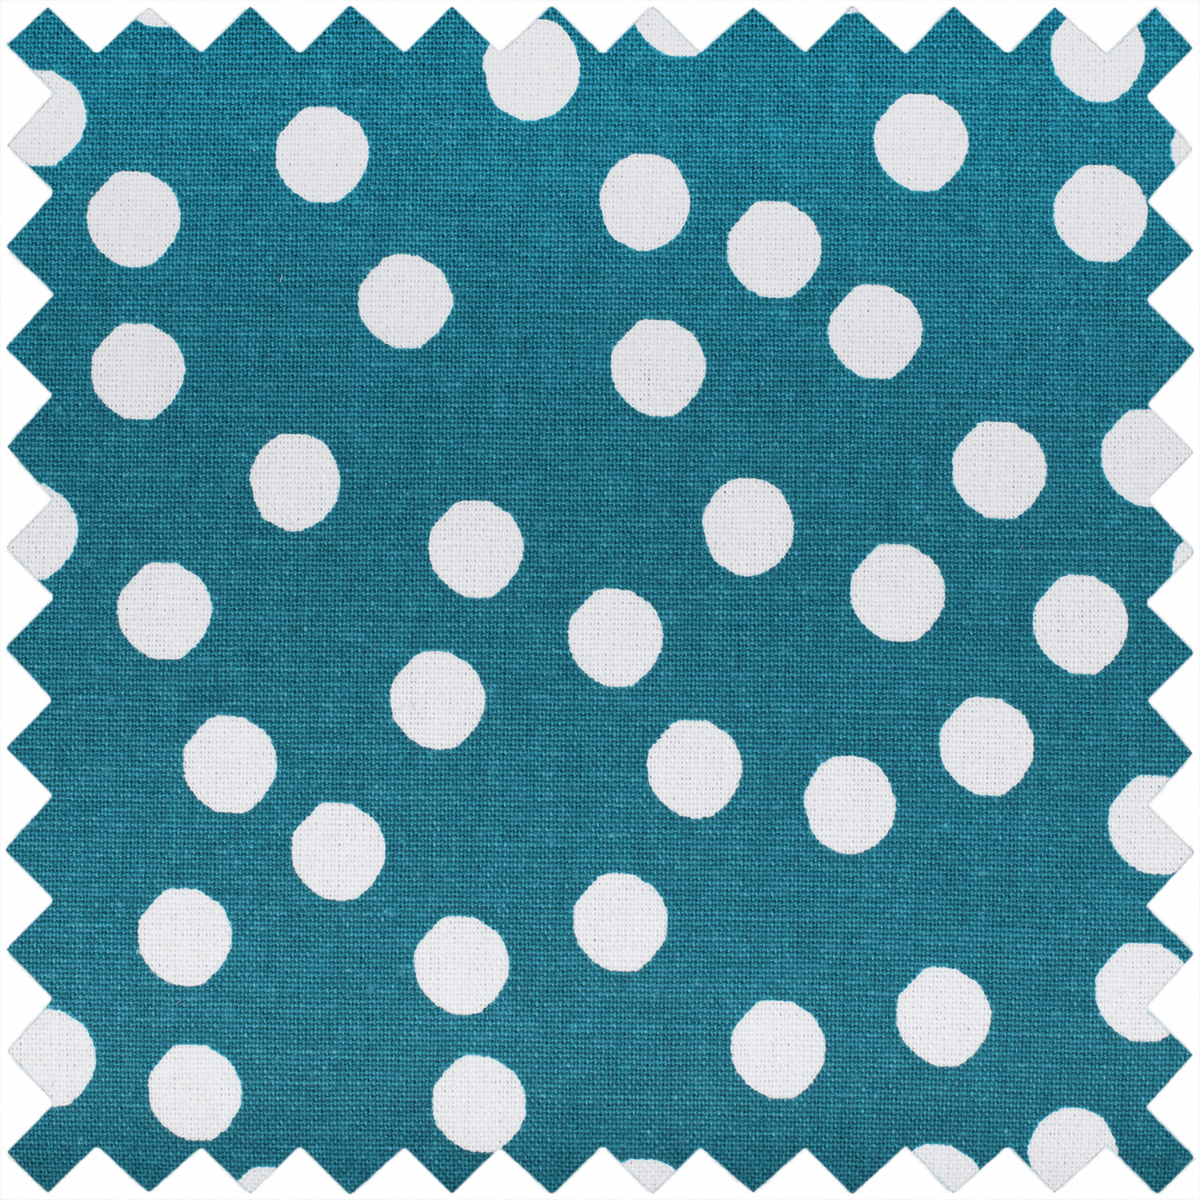 Sewing Box Teal Spot Large